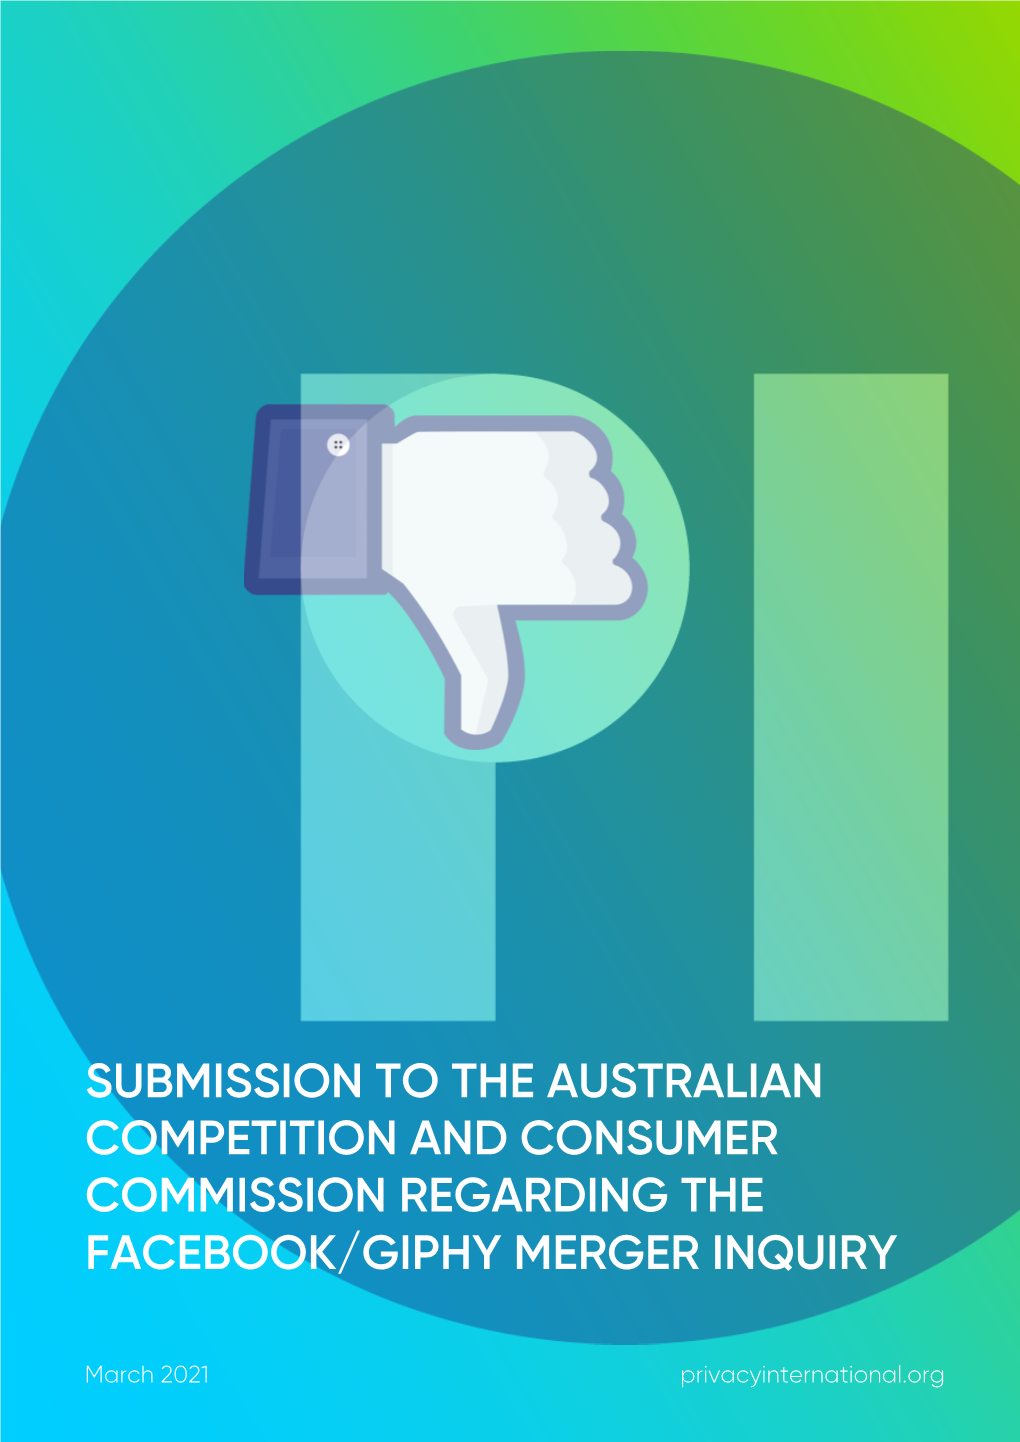 PI's Submission to the Australian Competition and Consumer